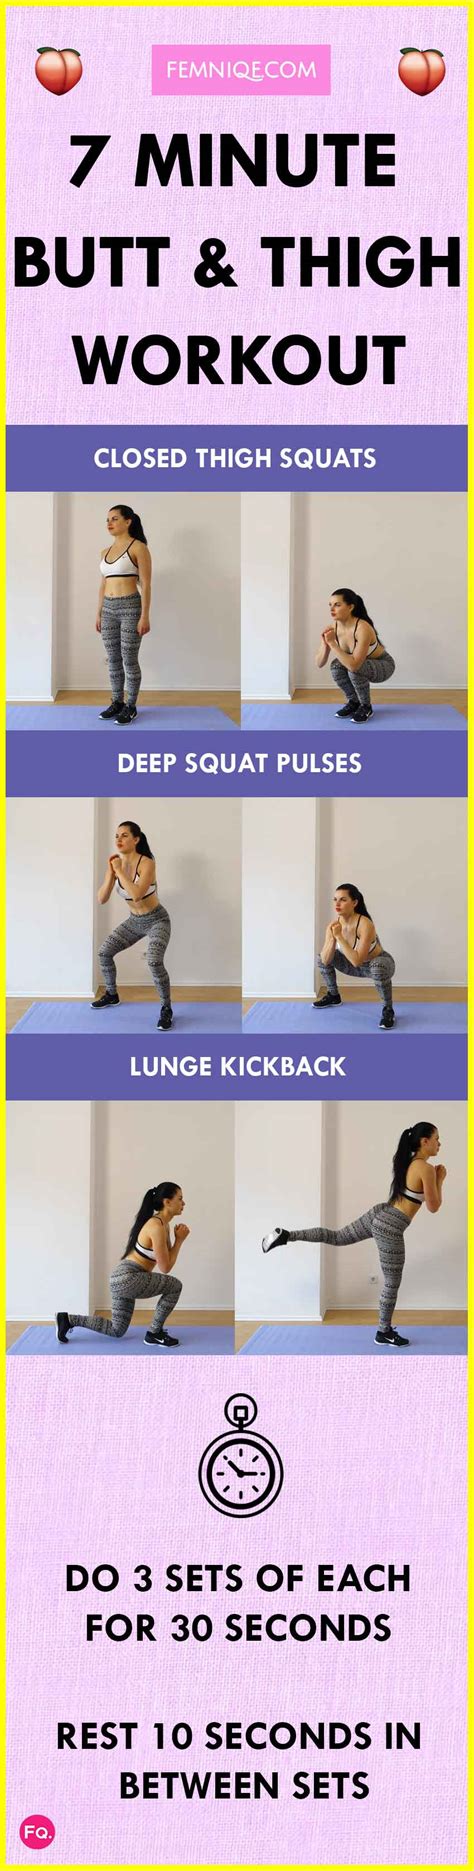 7 Minute Butt And Thigh Workout Bigger Booty And Leg Toning Femniqe